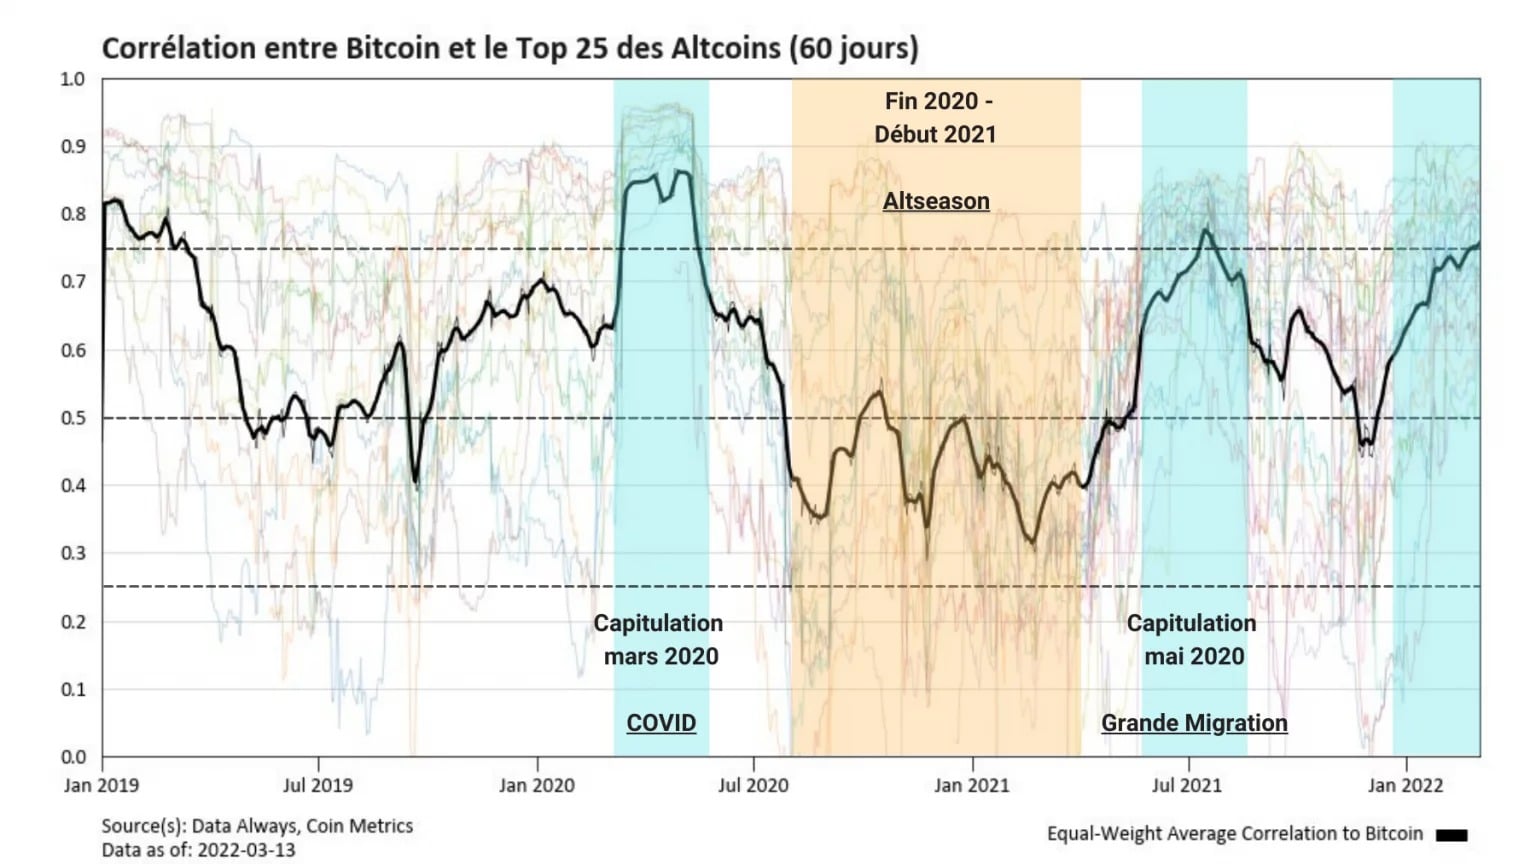 Figure 3: Correlation between BTC and the Top 25 altcoins